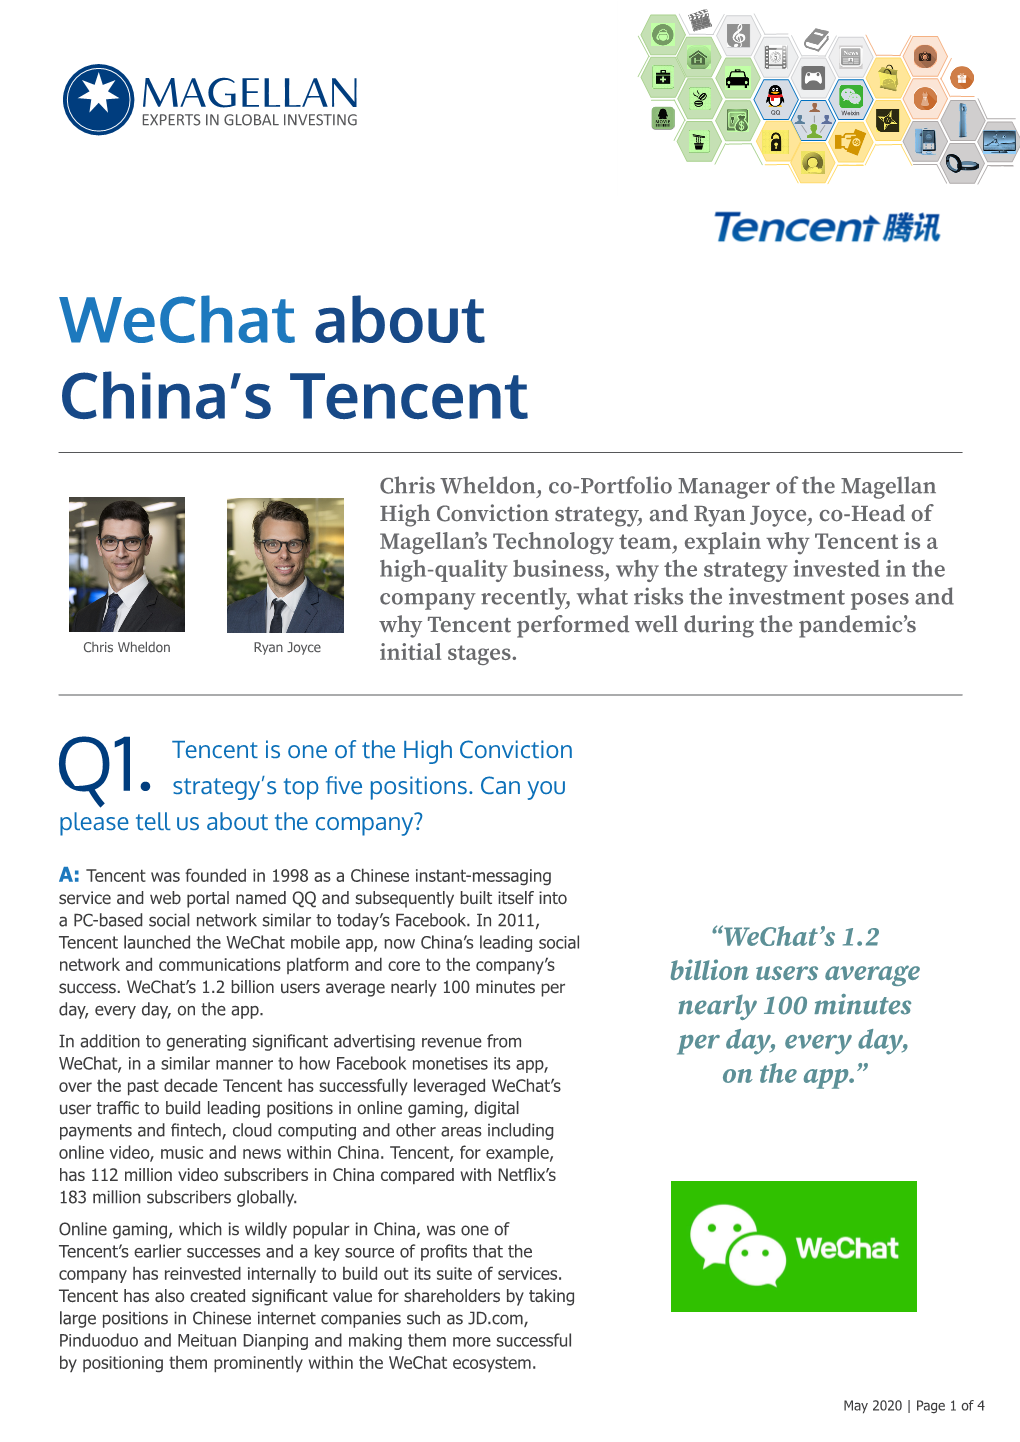 Wechat About China's Tencent